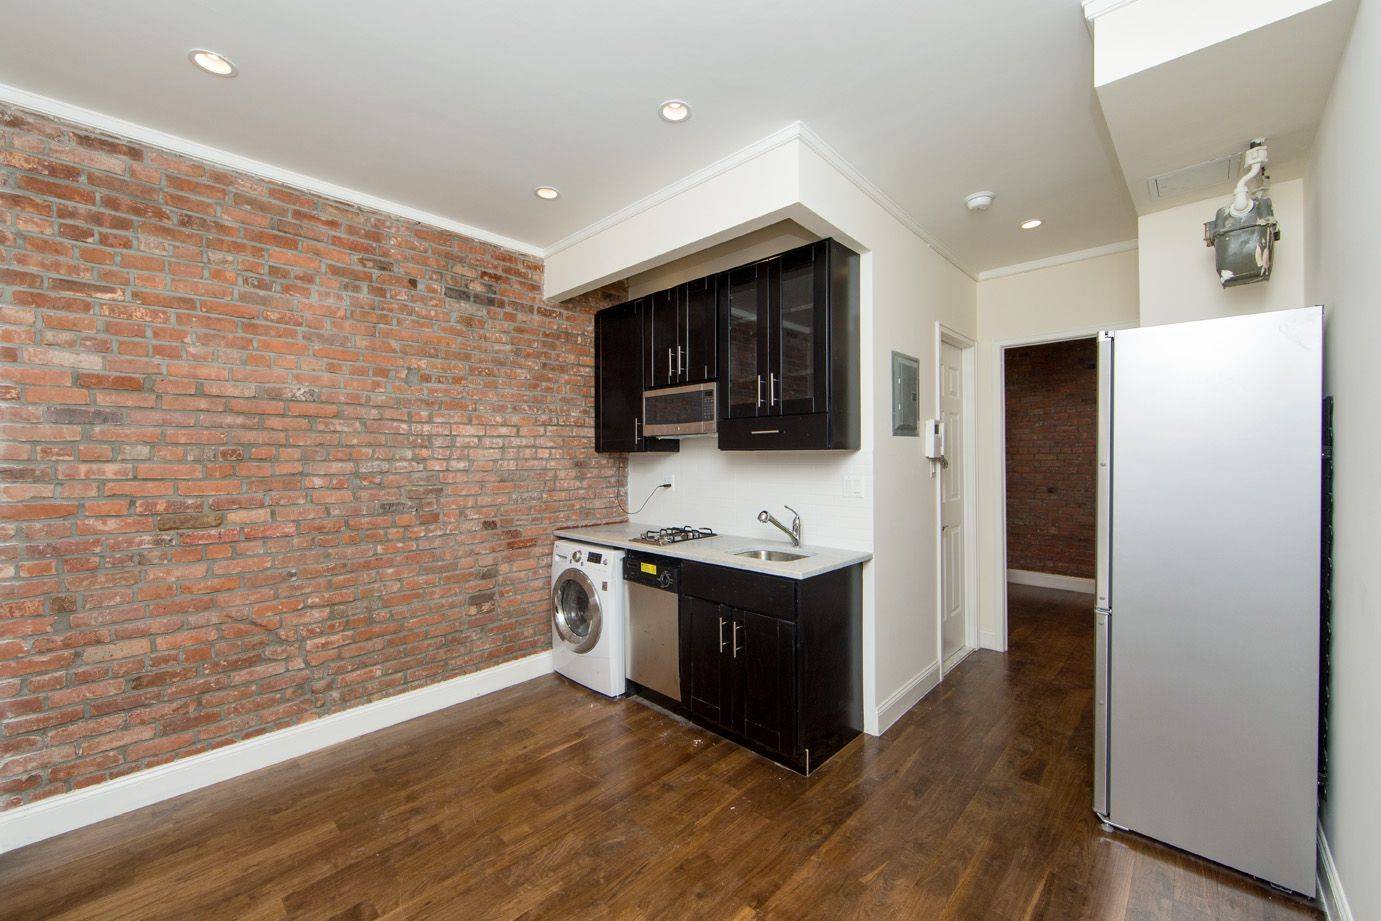 No Fee Two Bedroom Apartment for Rent - Located in East Village - Private Patio - Washer/Dryer in Unit